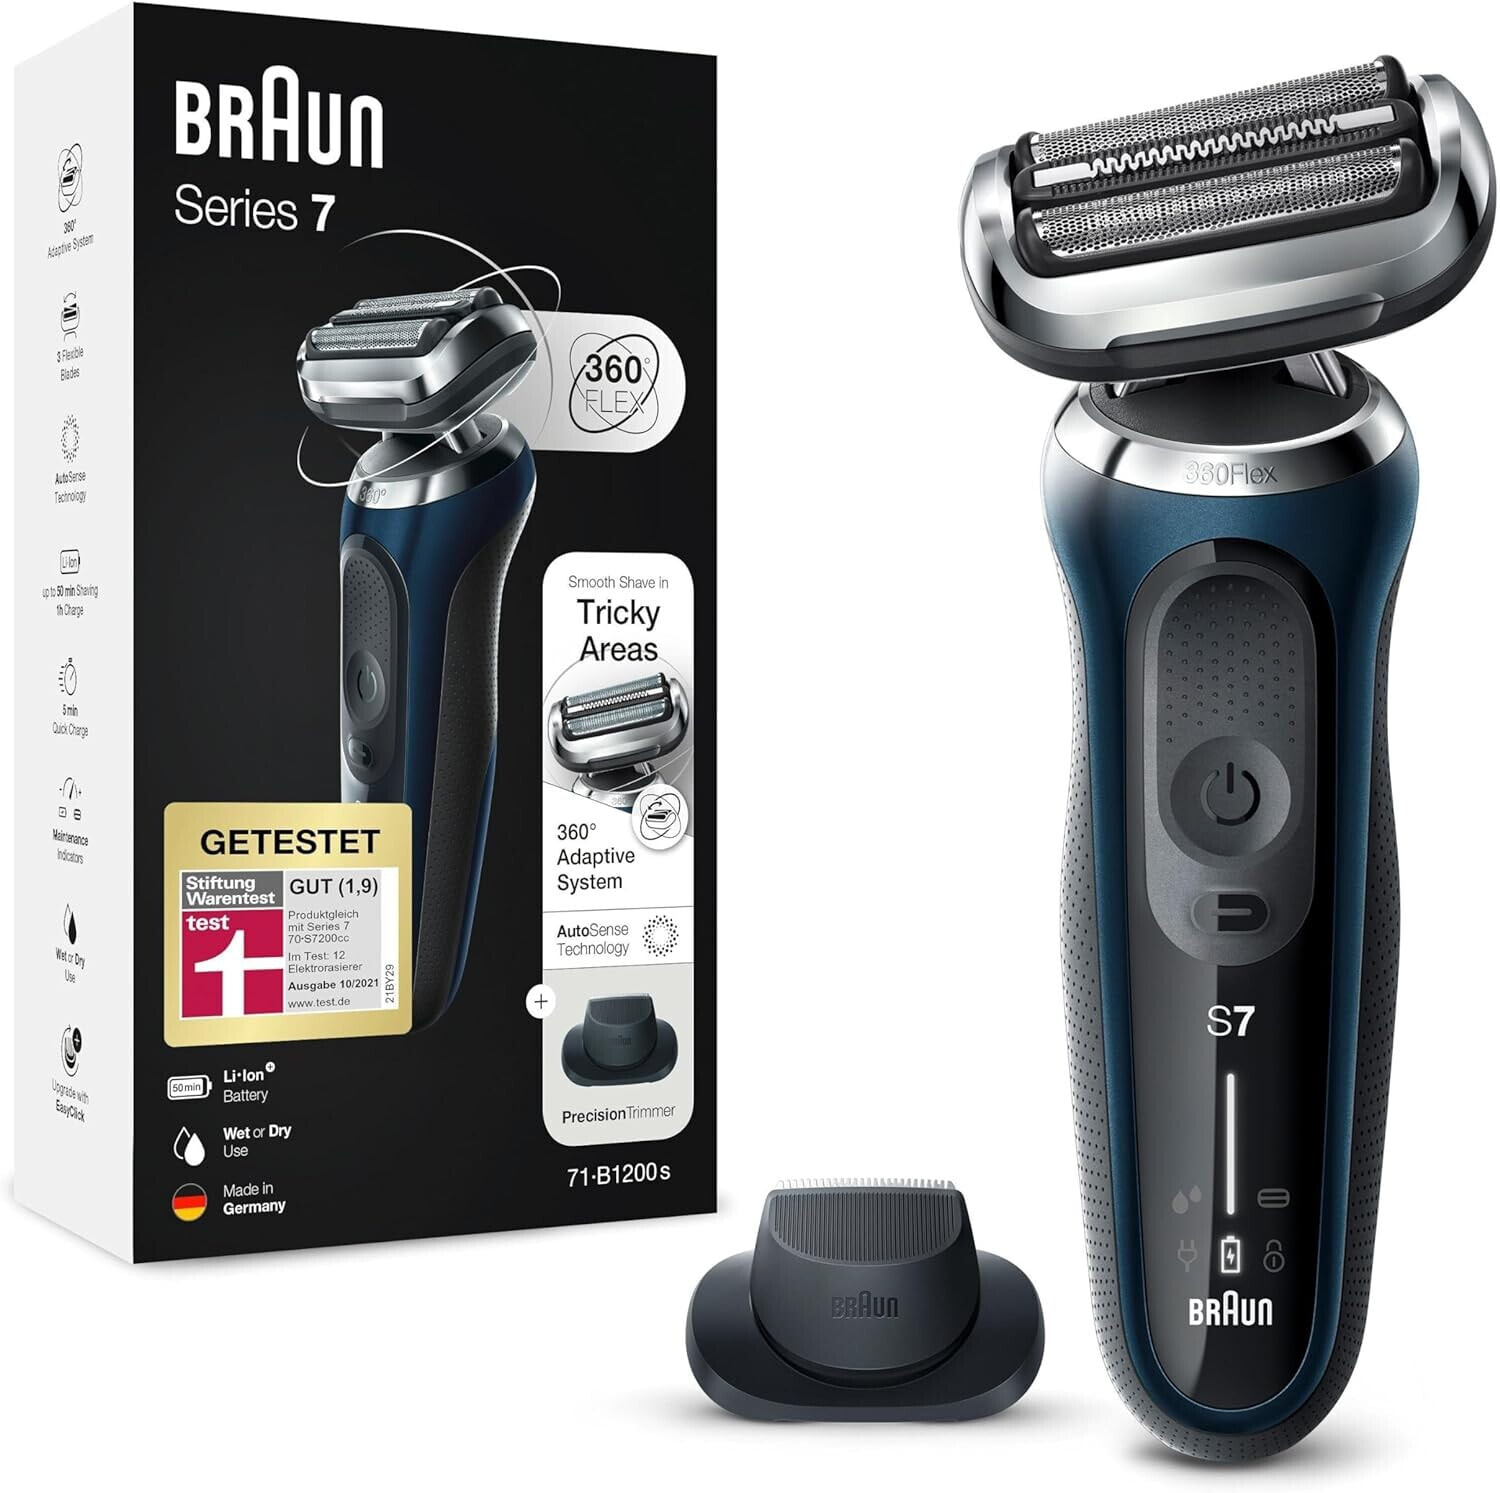 Braun Series 7 Men's Razor with EasyClick Attachment, Electric Shaver & Precision Trimmer, 360° Flex, Wet & Dry, Rechargeable & Wireless, Gift Man, 71-B1200s, Blue